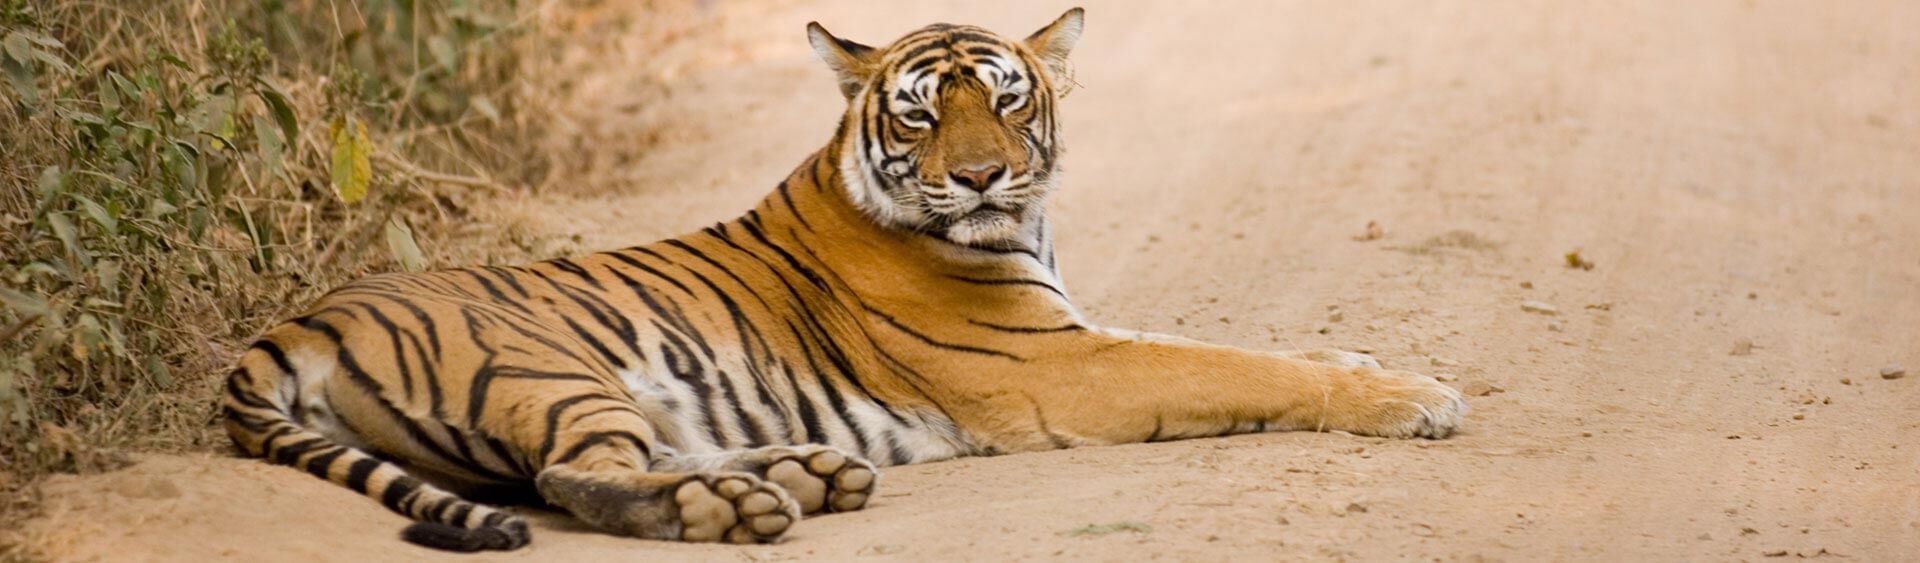 Ranthambore Tour Package From Delhi - AvaniHolidays